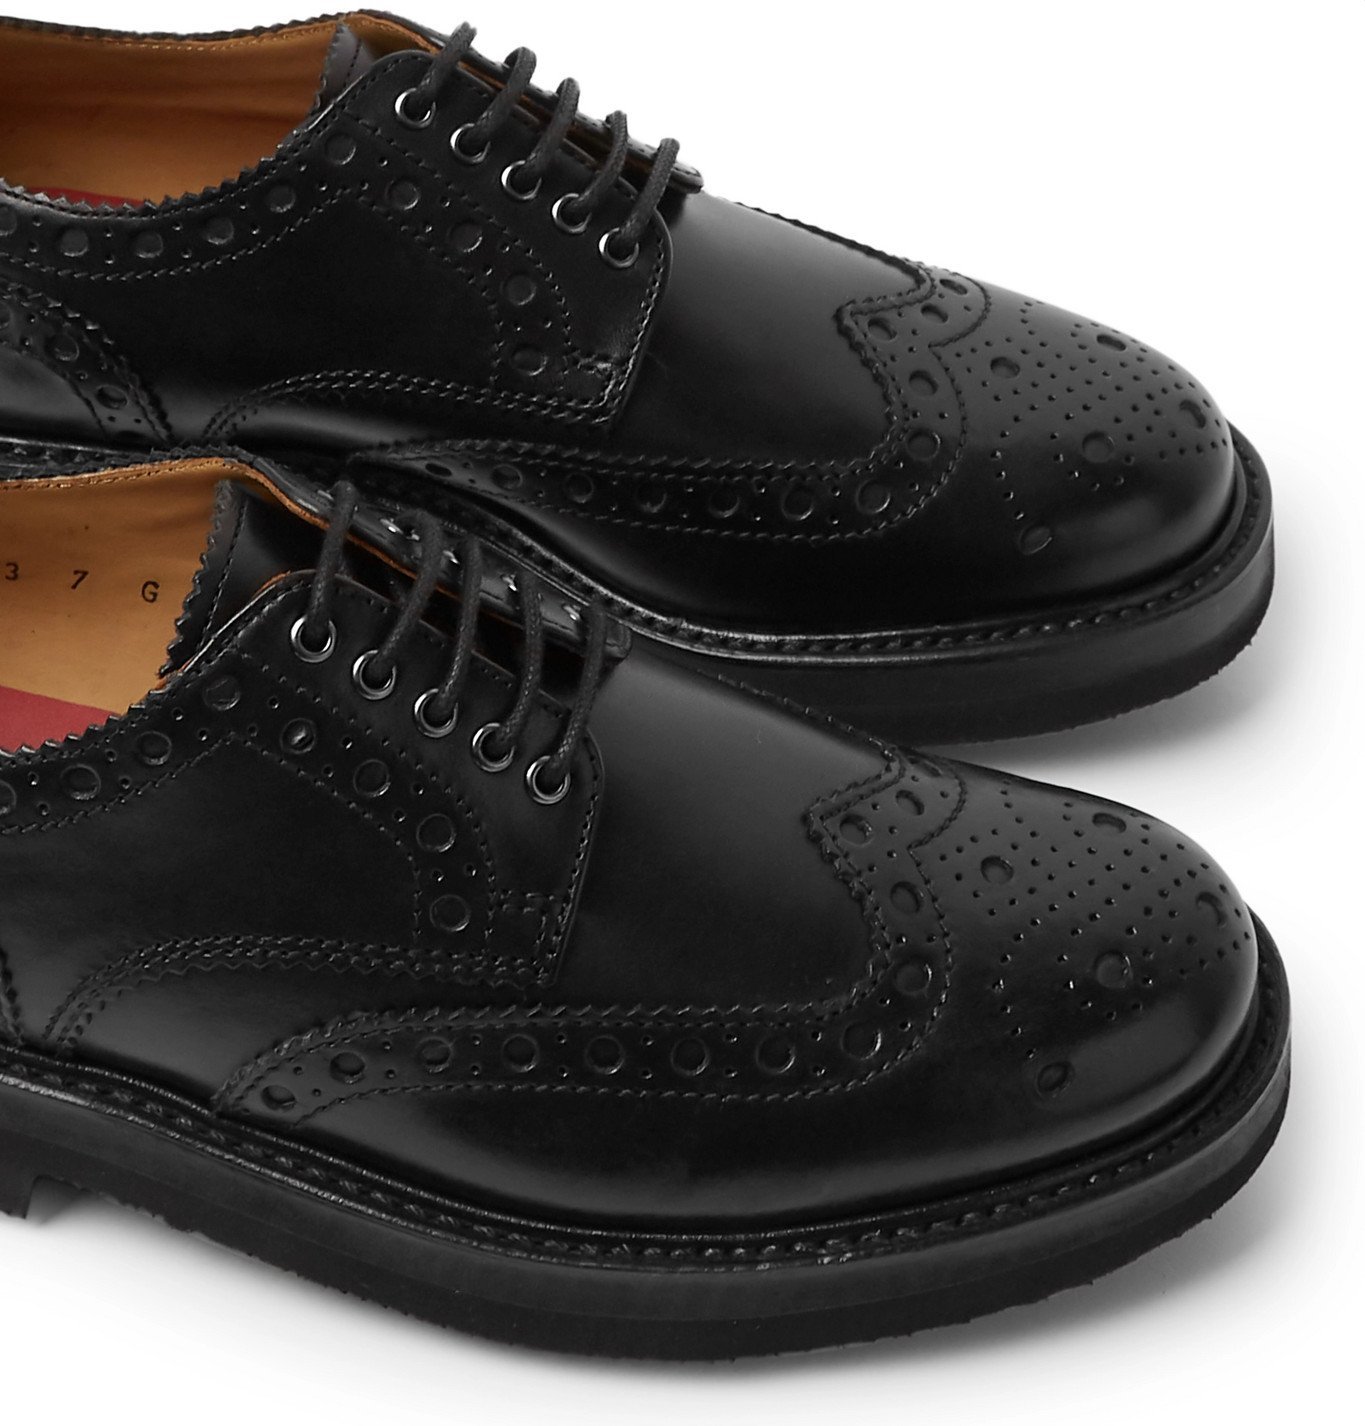 Grenson - Archie Leather Wingtip Brogues - Black Grenson